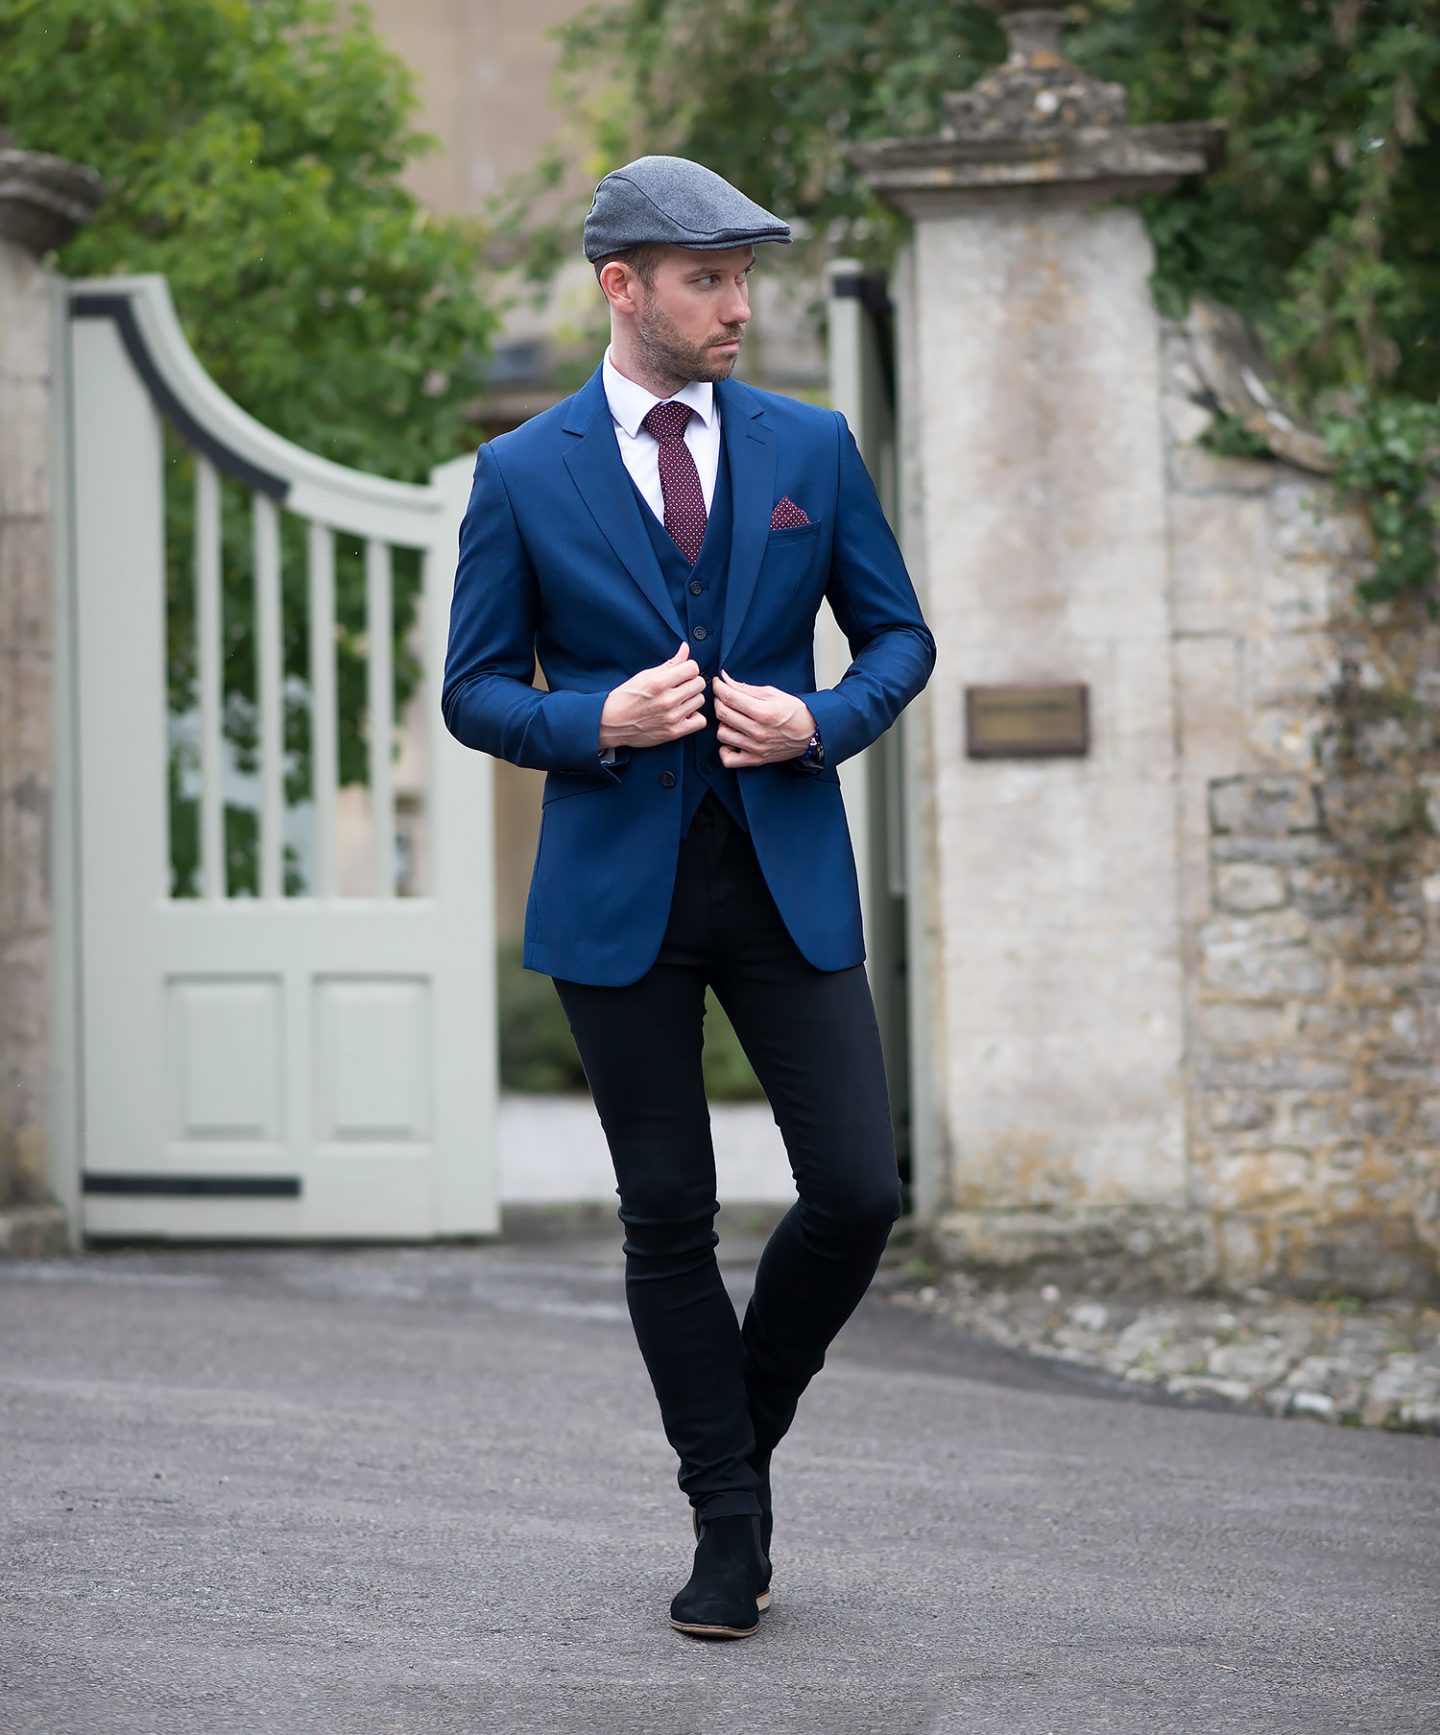 Mens-Fashion-Blogger-Blue-Suit-Black-Skinny-Jeans-Outfit-1440x1735.jpg